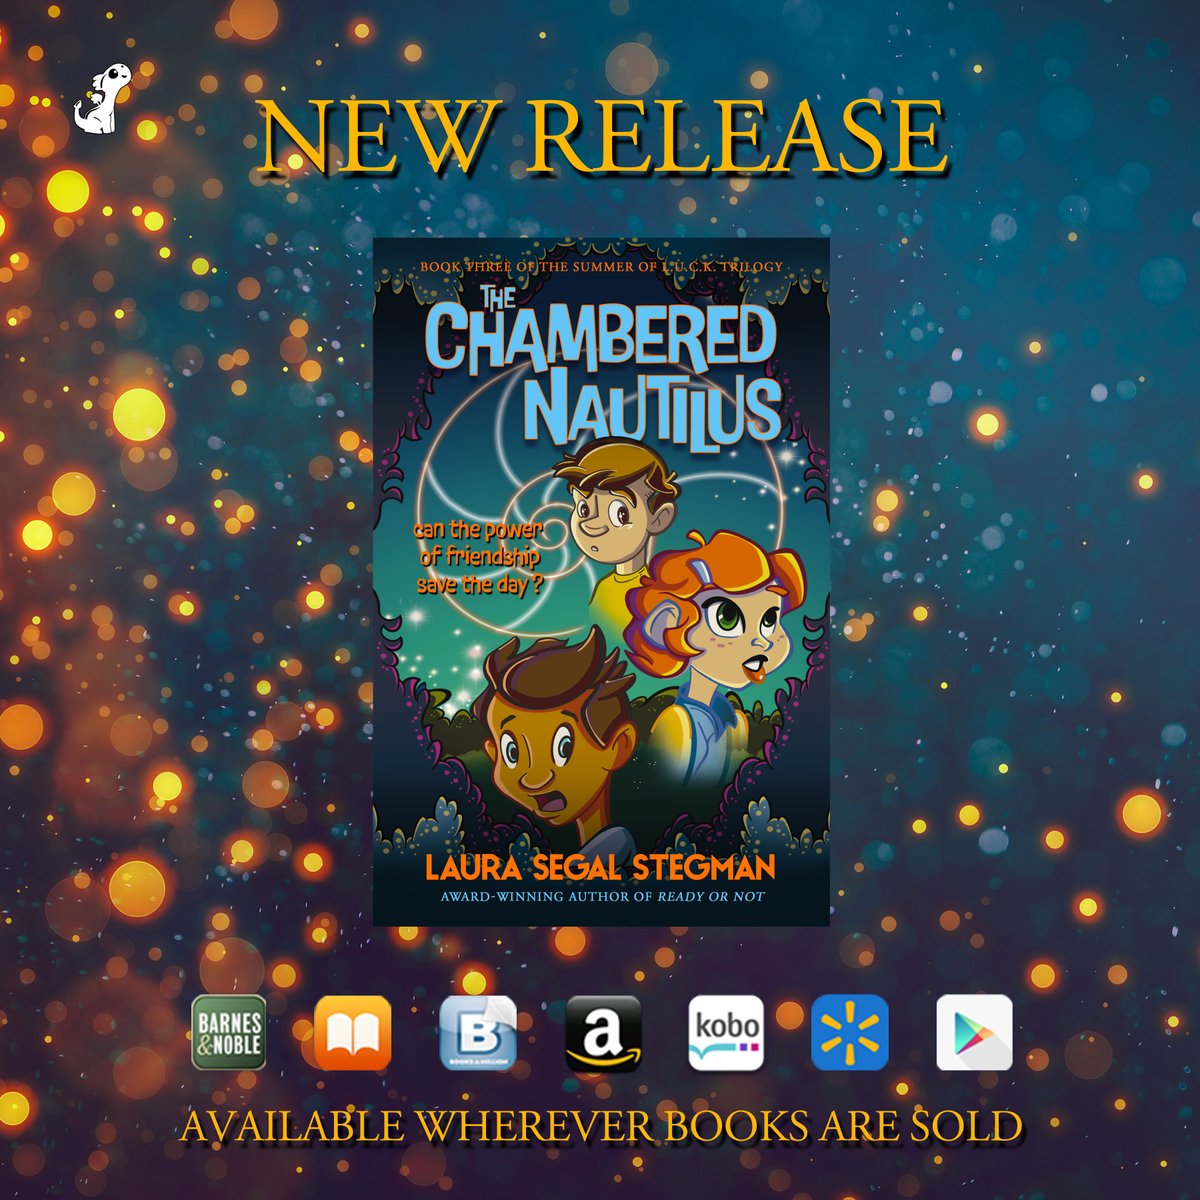 Get ready for a whirlwind adventure with The Chambered Nautilus, the thrilling conclusion to Laura Segal Stegman’s enchanting Summer of L.U.C.K. trilogy where best friends Darby, Justin, and Naz are facing their biggest challenge yet.